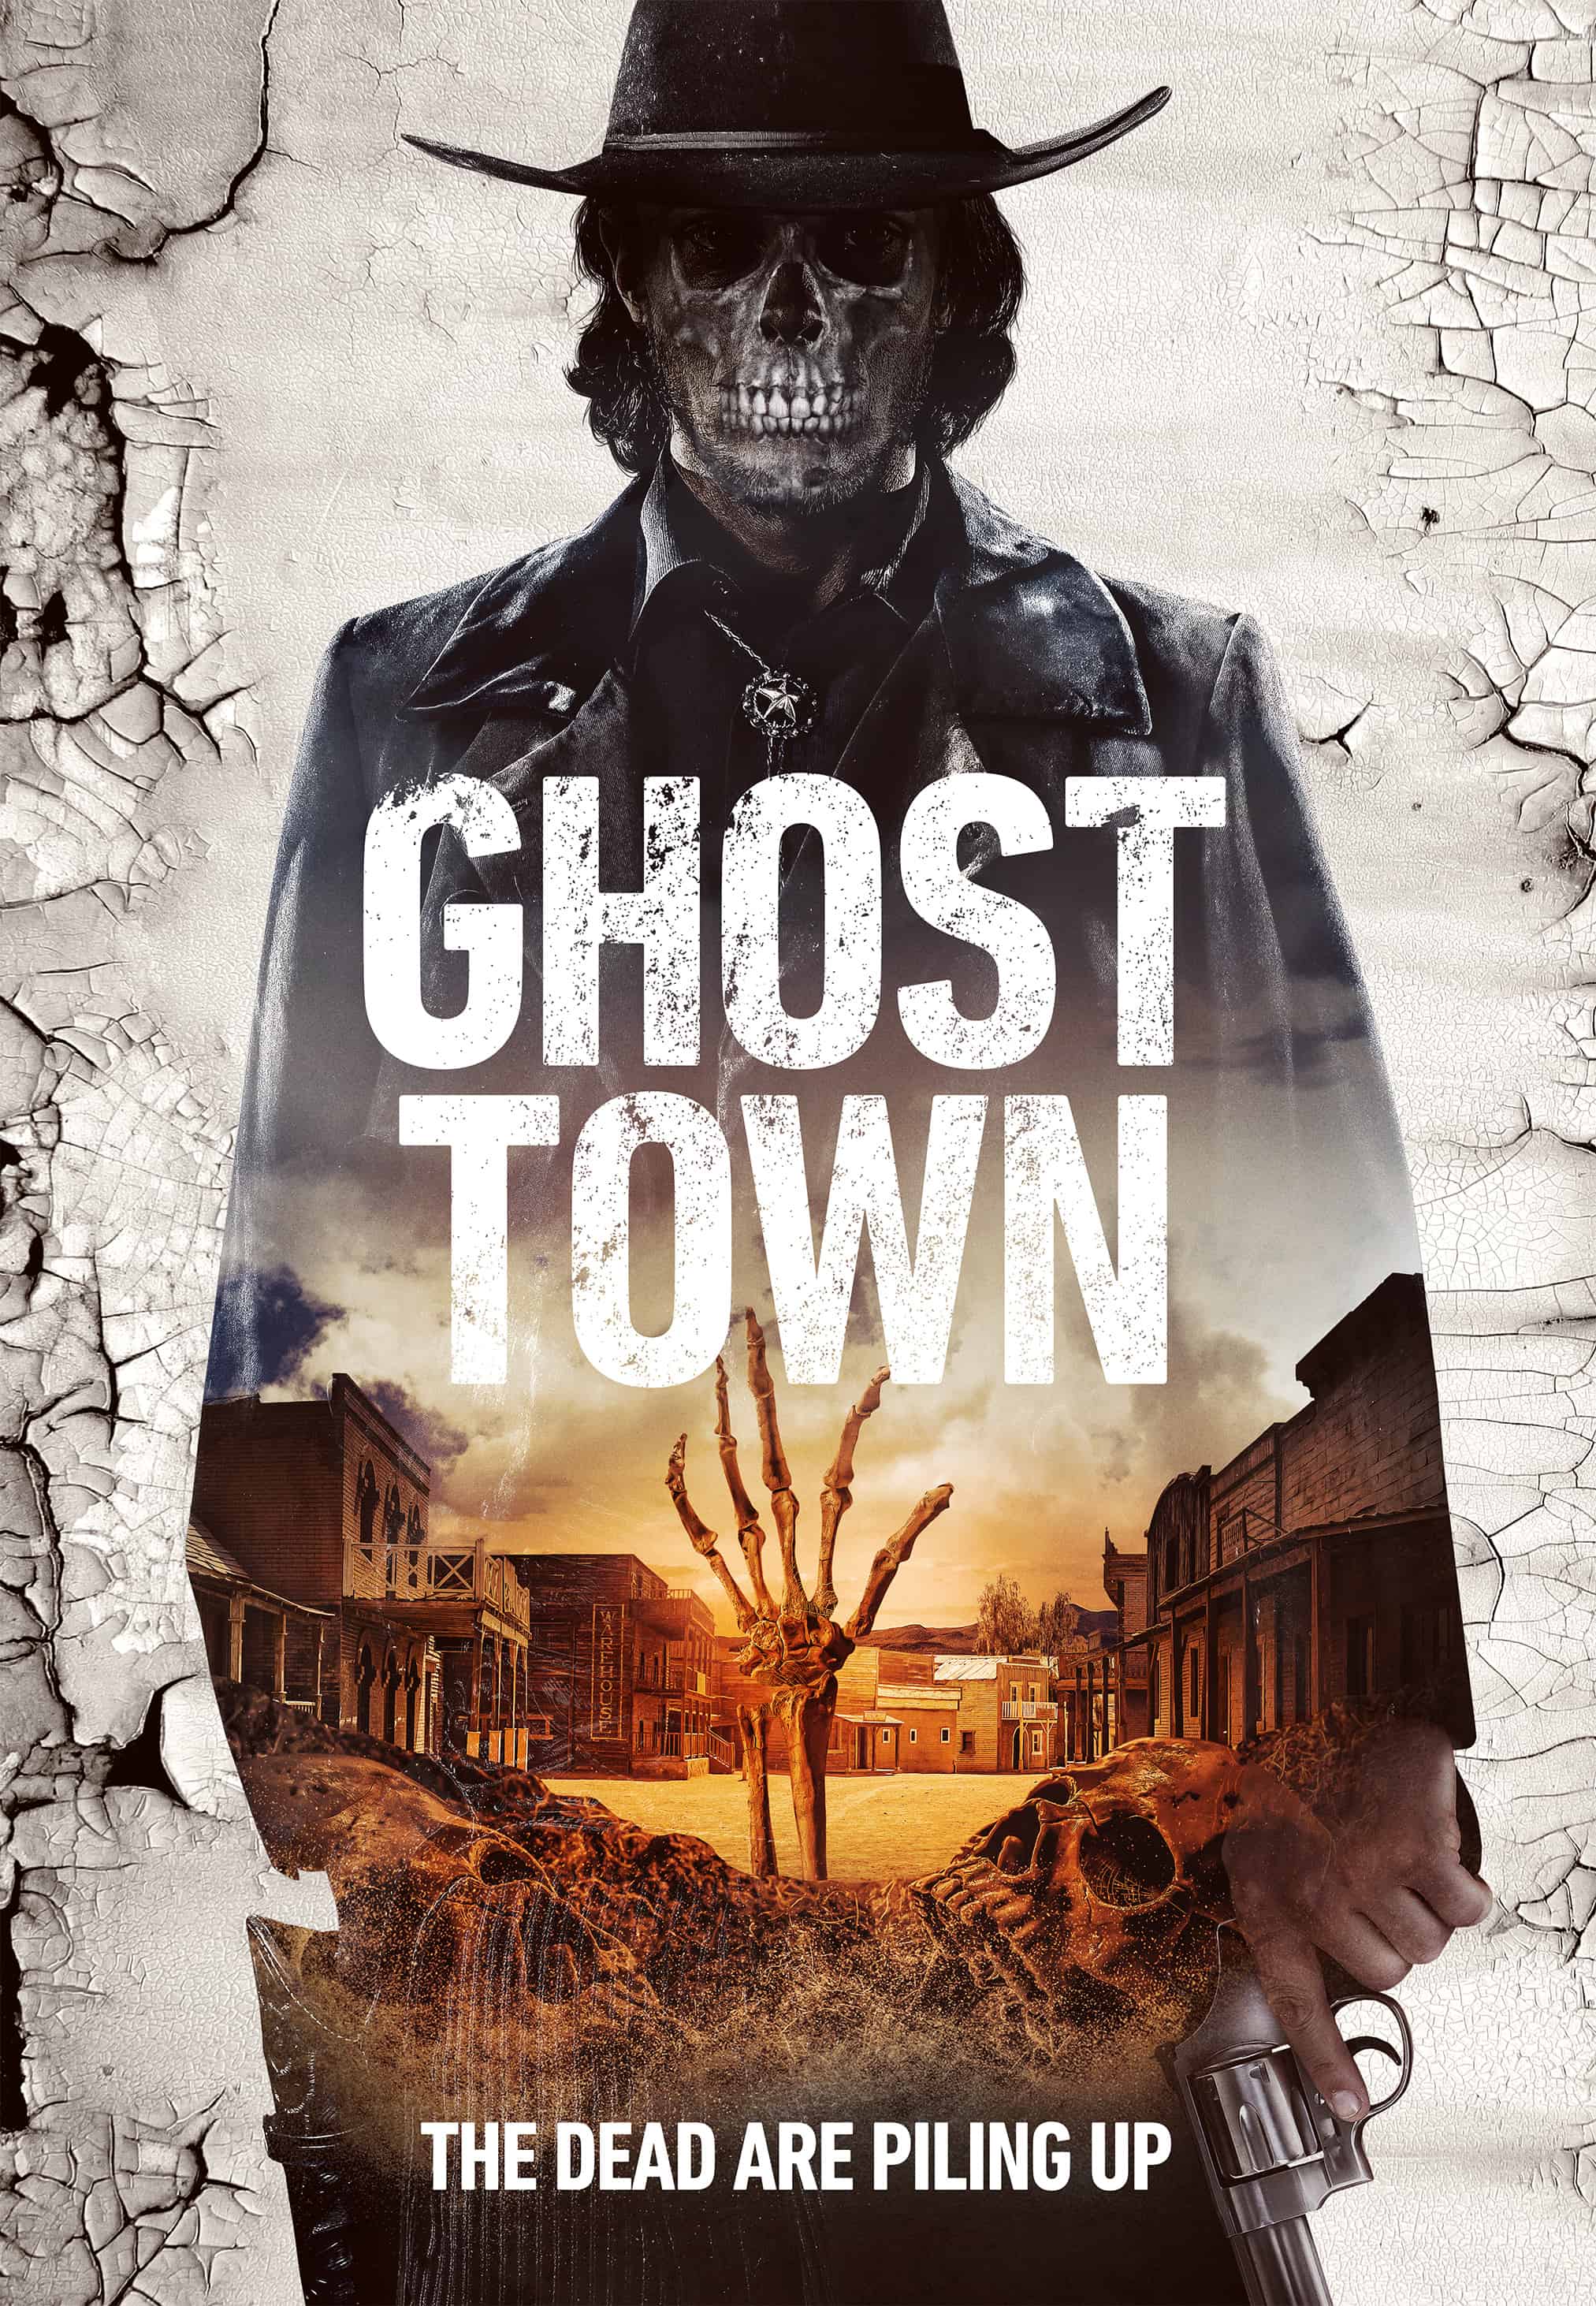 Ghost Town offers up a poster and trailer arrives March 7th 35